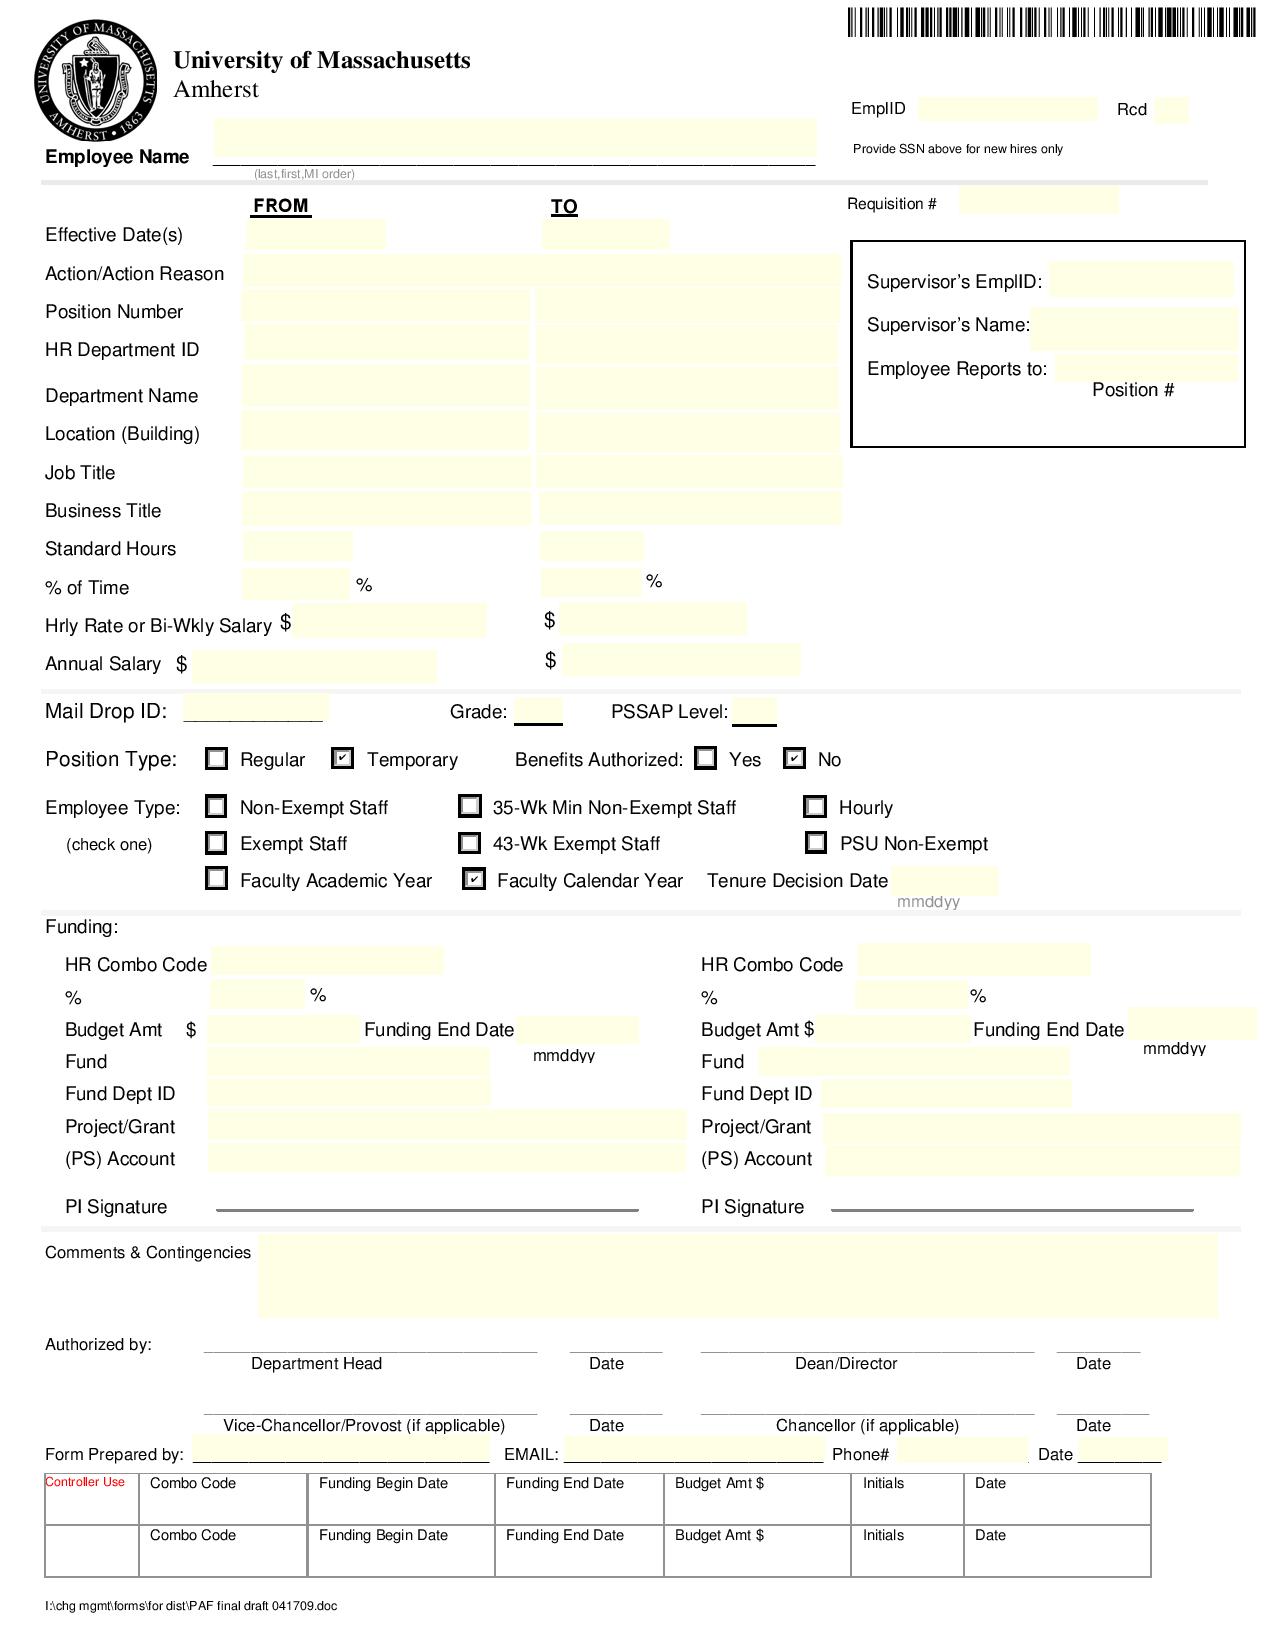 paf personnel action form template page 0012